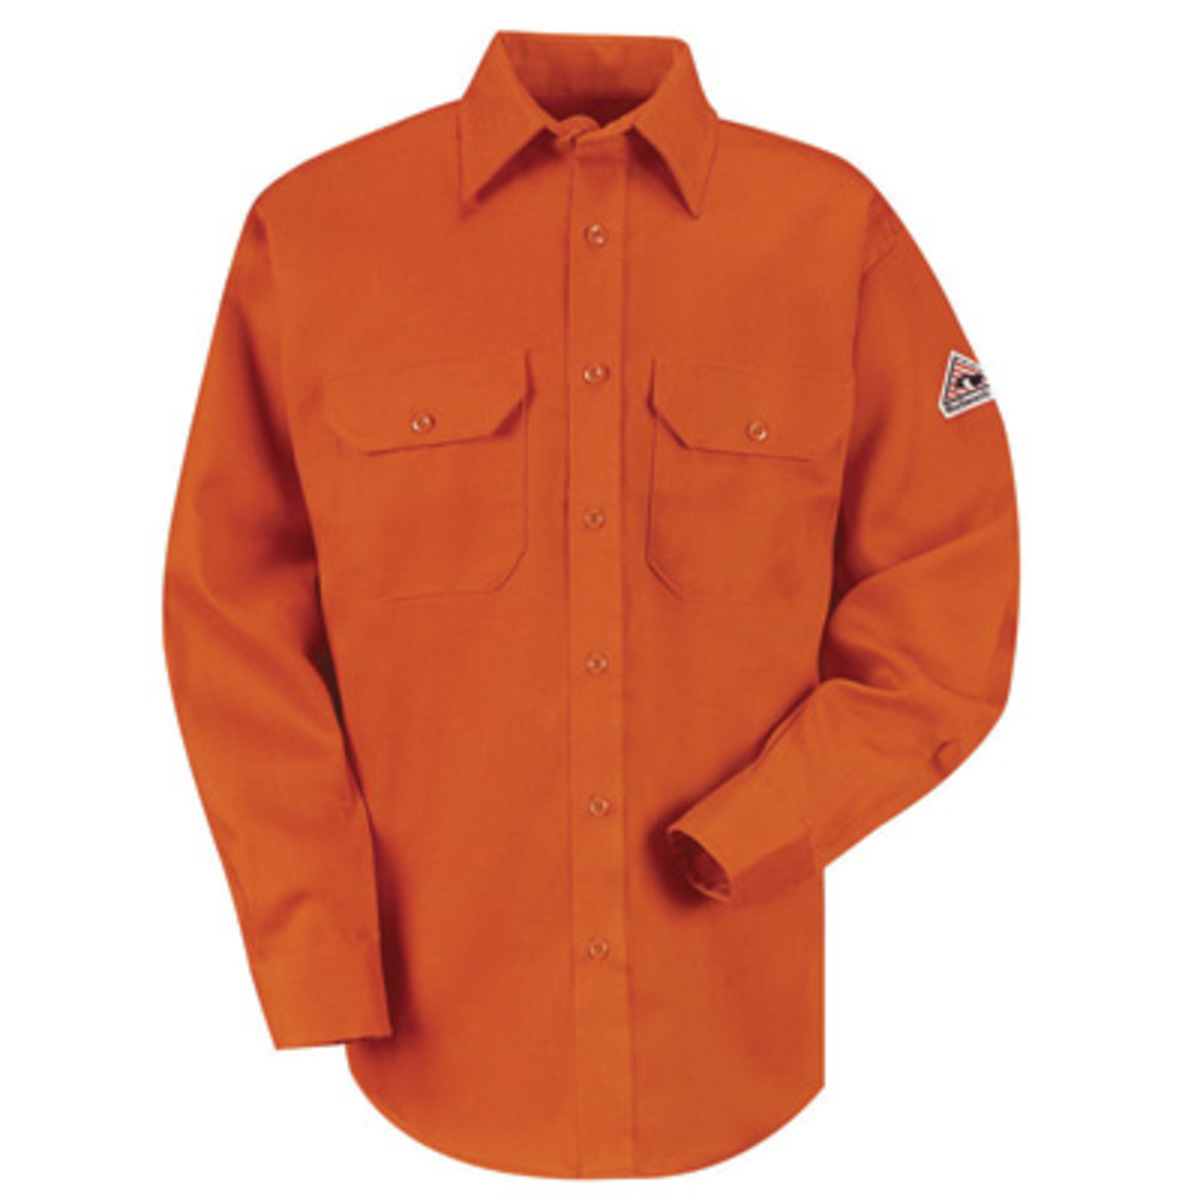 Bulwark® 4X Tall Orange EXCEL FR® ComforTouch® Flame Resistant Uniform Shirt With Button Front Closure